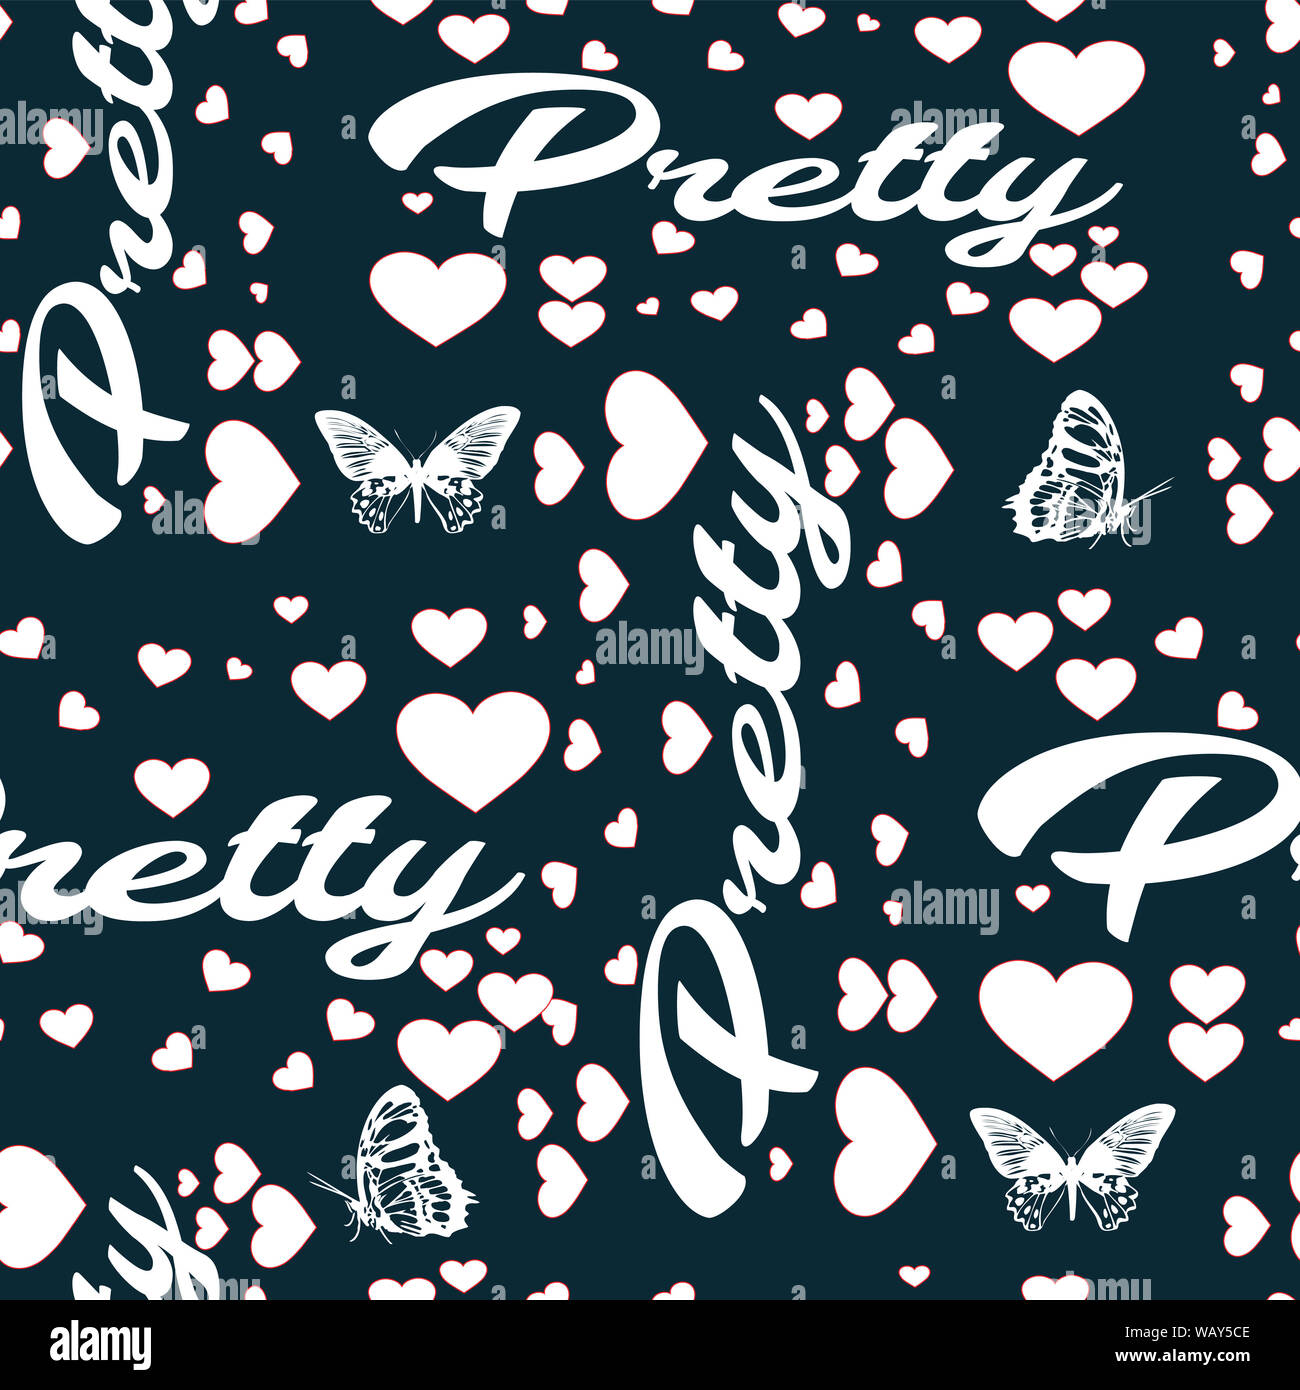 Trendy fashion pretty text with hearts design pattern navy Stock Photo